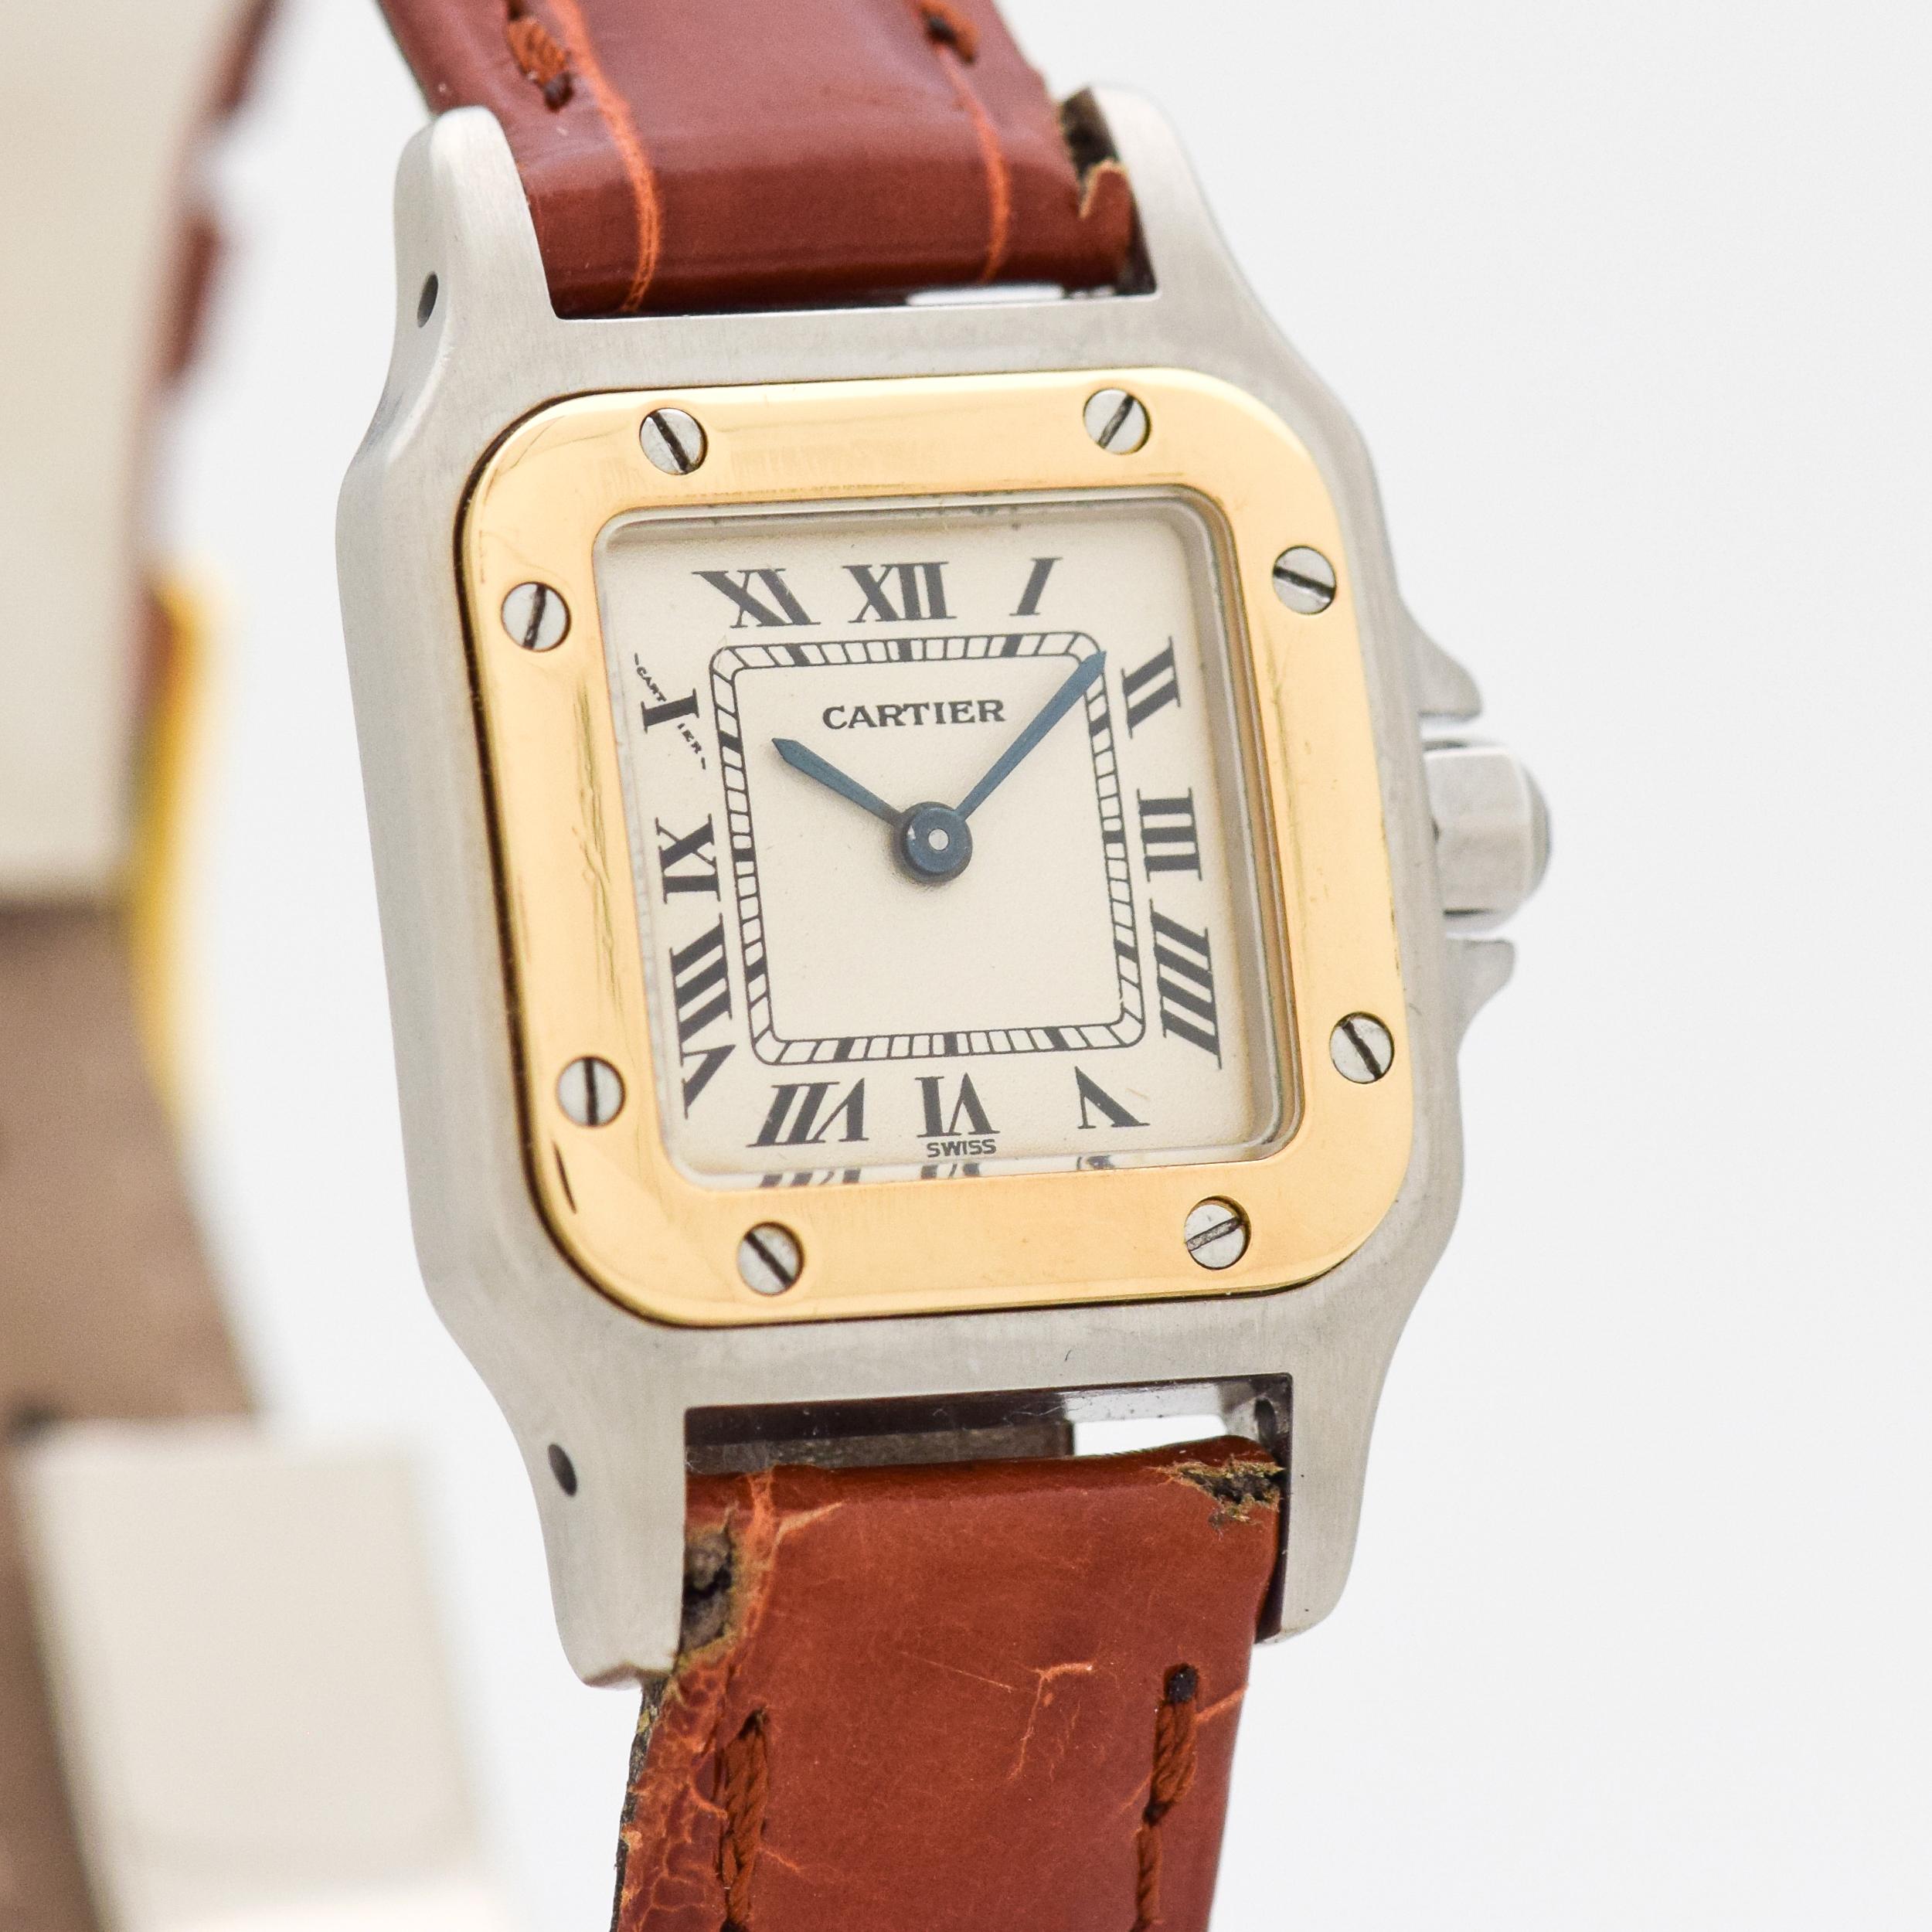 1990's Cartier Ladies Size Santos Two Tine 18k Yellow Gold and Stainless Steel watch with Original Silver Dial with Black Roman Numerals. 25mm x 34mm lug to lug (0.98 in. x 1.34 in.) - Quartz Movement. Equipped with a 100% Genuine Alligator Glossy